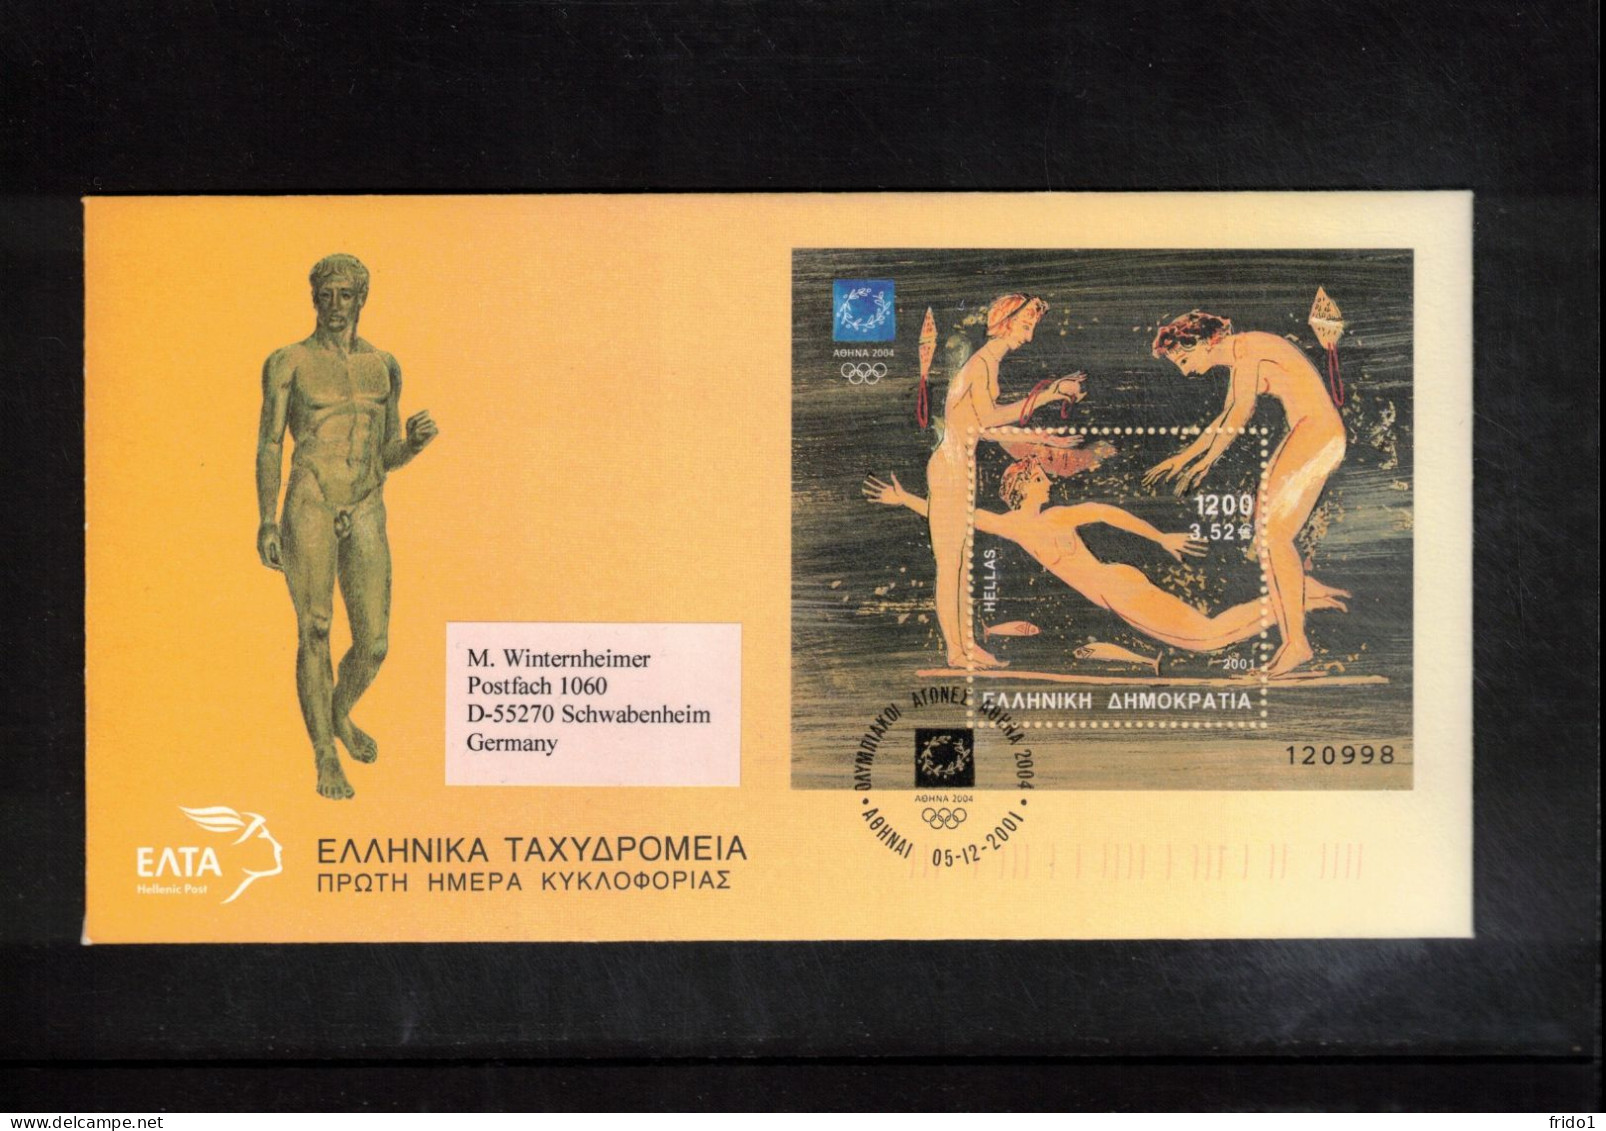 Greece 2001 Olympic Games Athens  Michel Block 19  FDC - Summer 2004: Athens